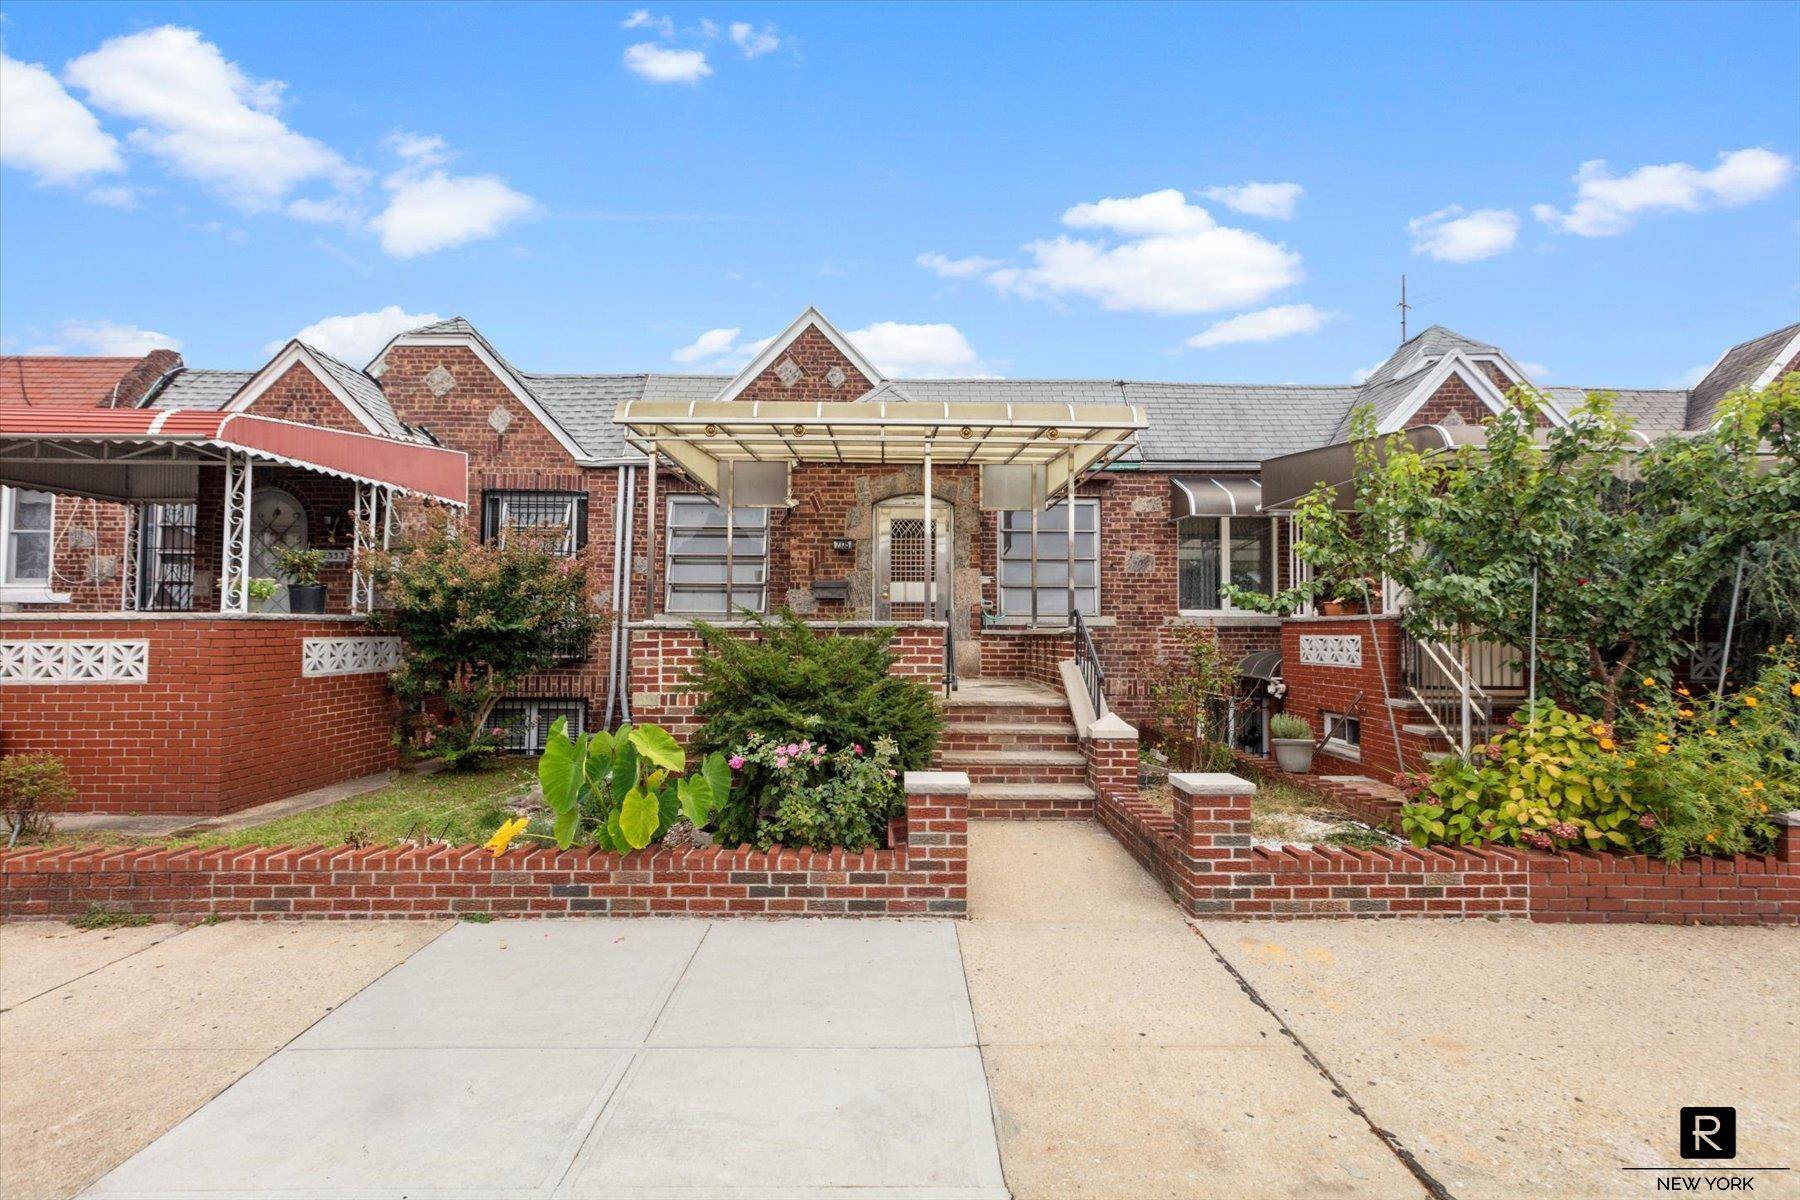 Newly renovated 3 bed 2 full bath brick home situated on a quiet block in Sheepshead Bay.